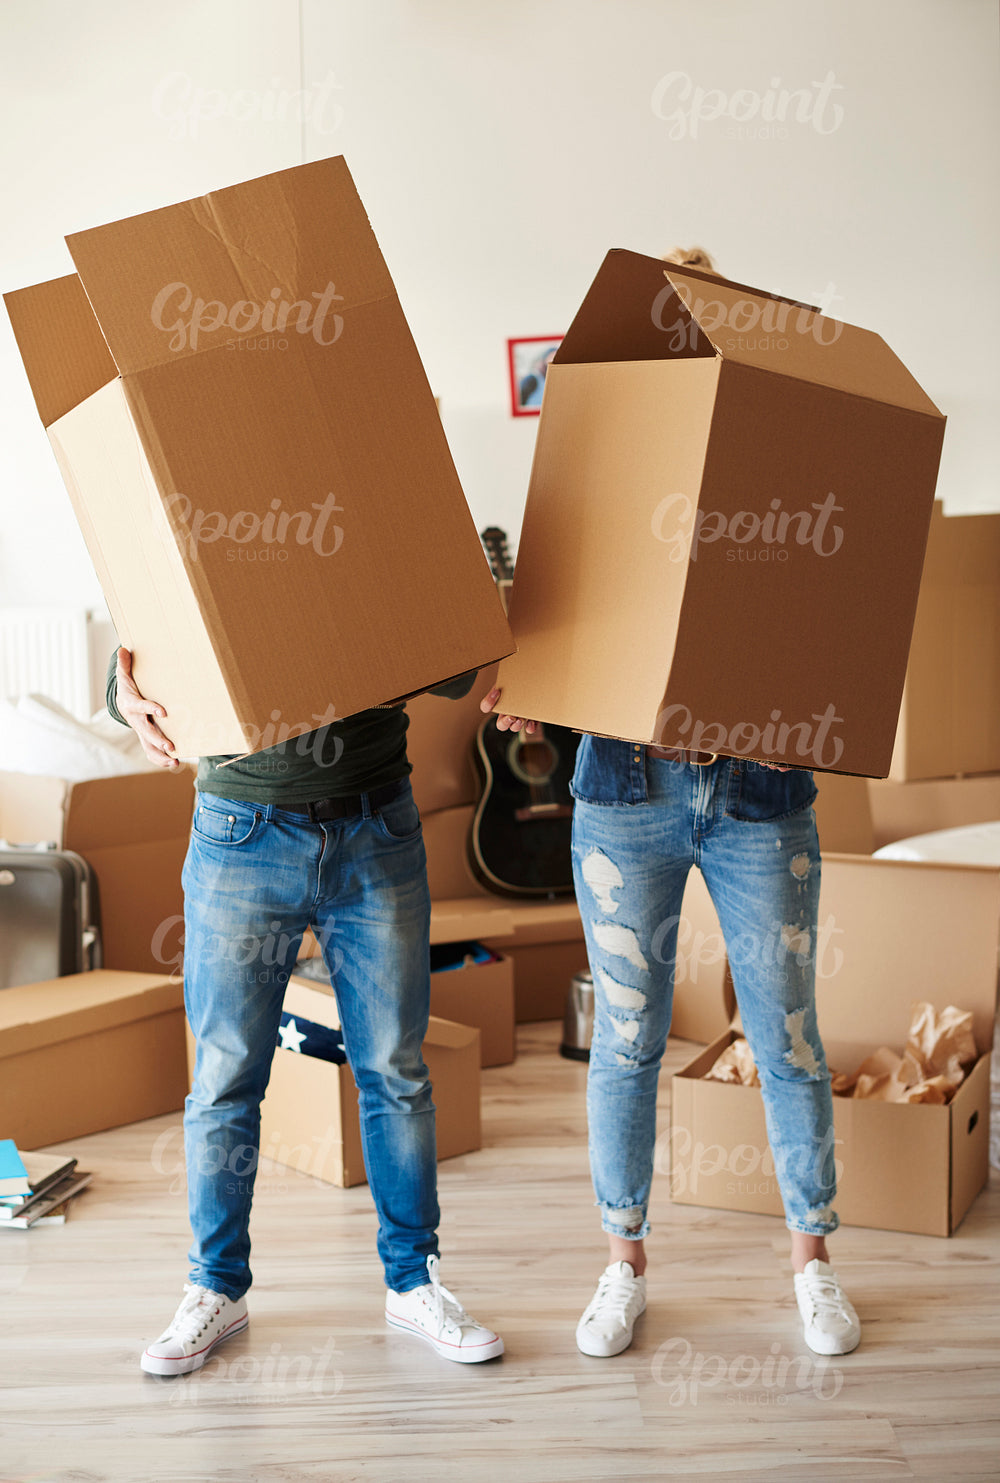 Couple faces behind cardboard boxes